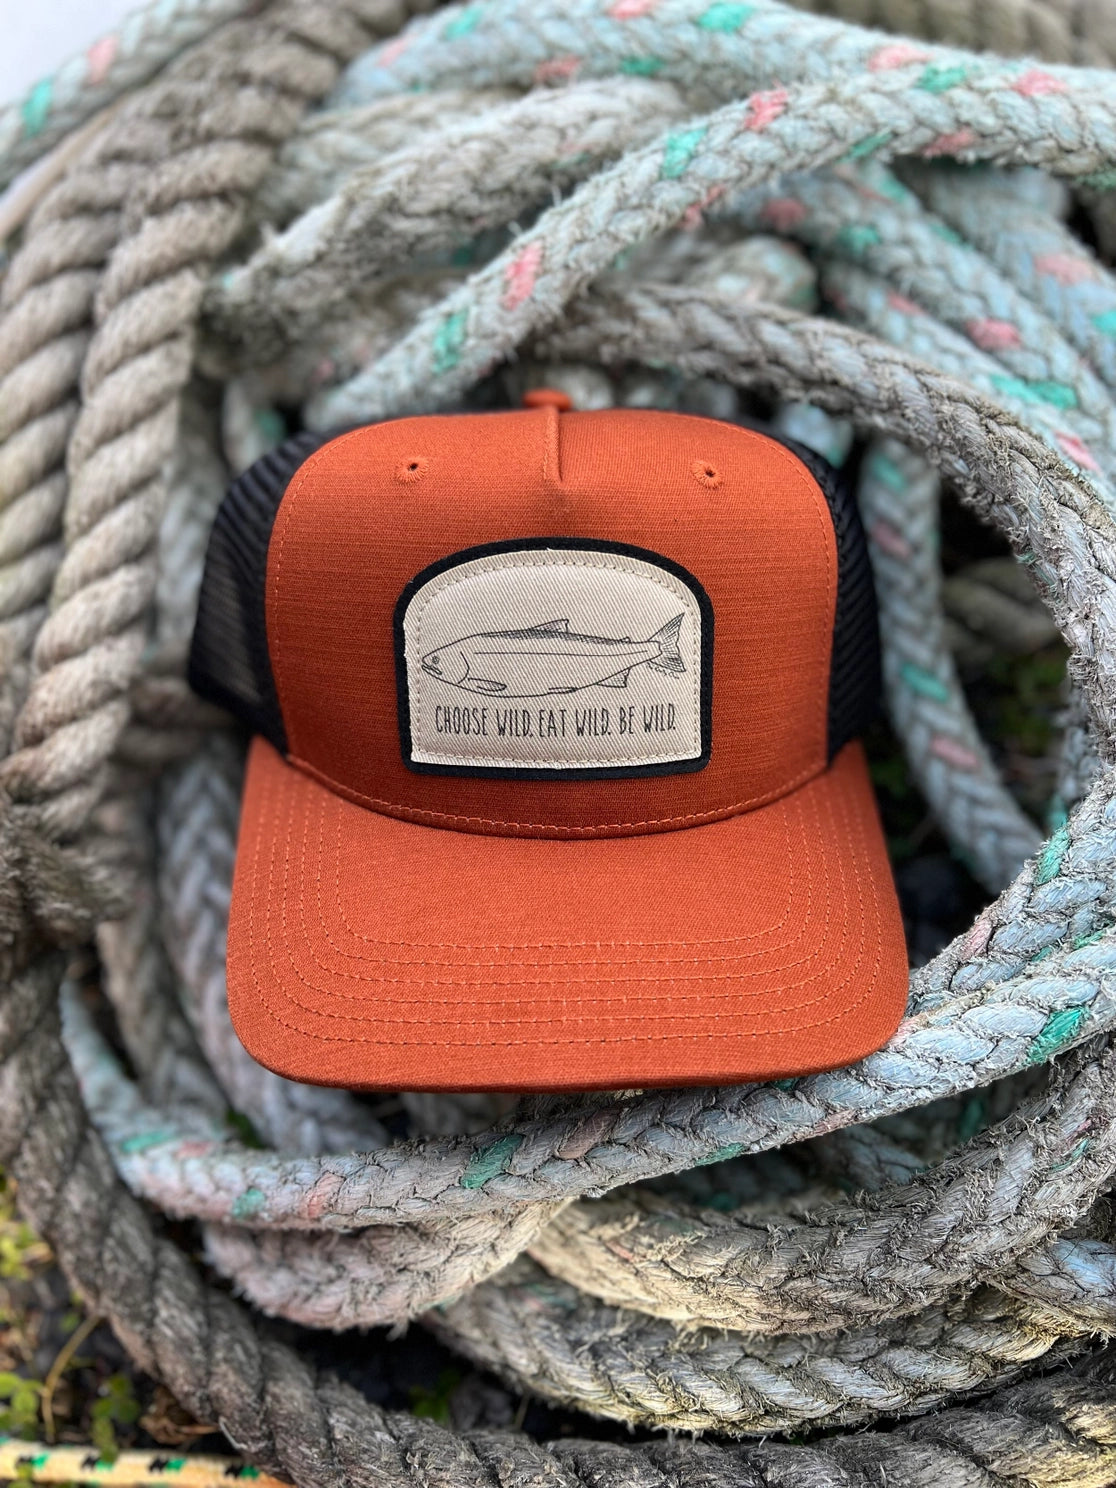 “Choose Wild, Eat Wild, Be Wild” Alaska Salmon Patch Hat from The Knotty Crew - Adult Sizing